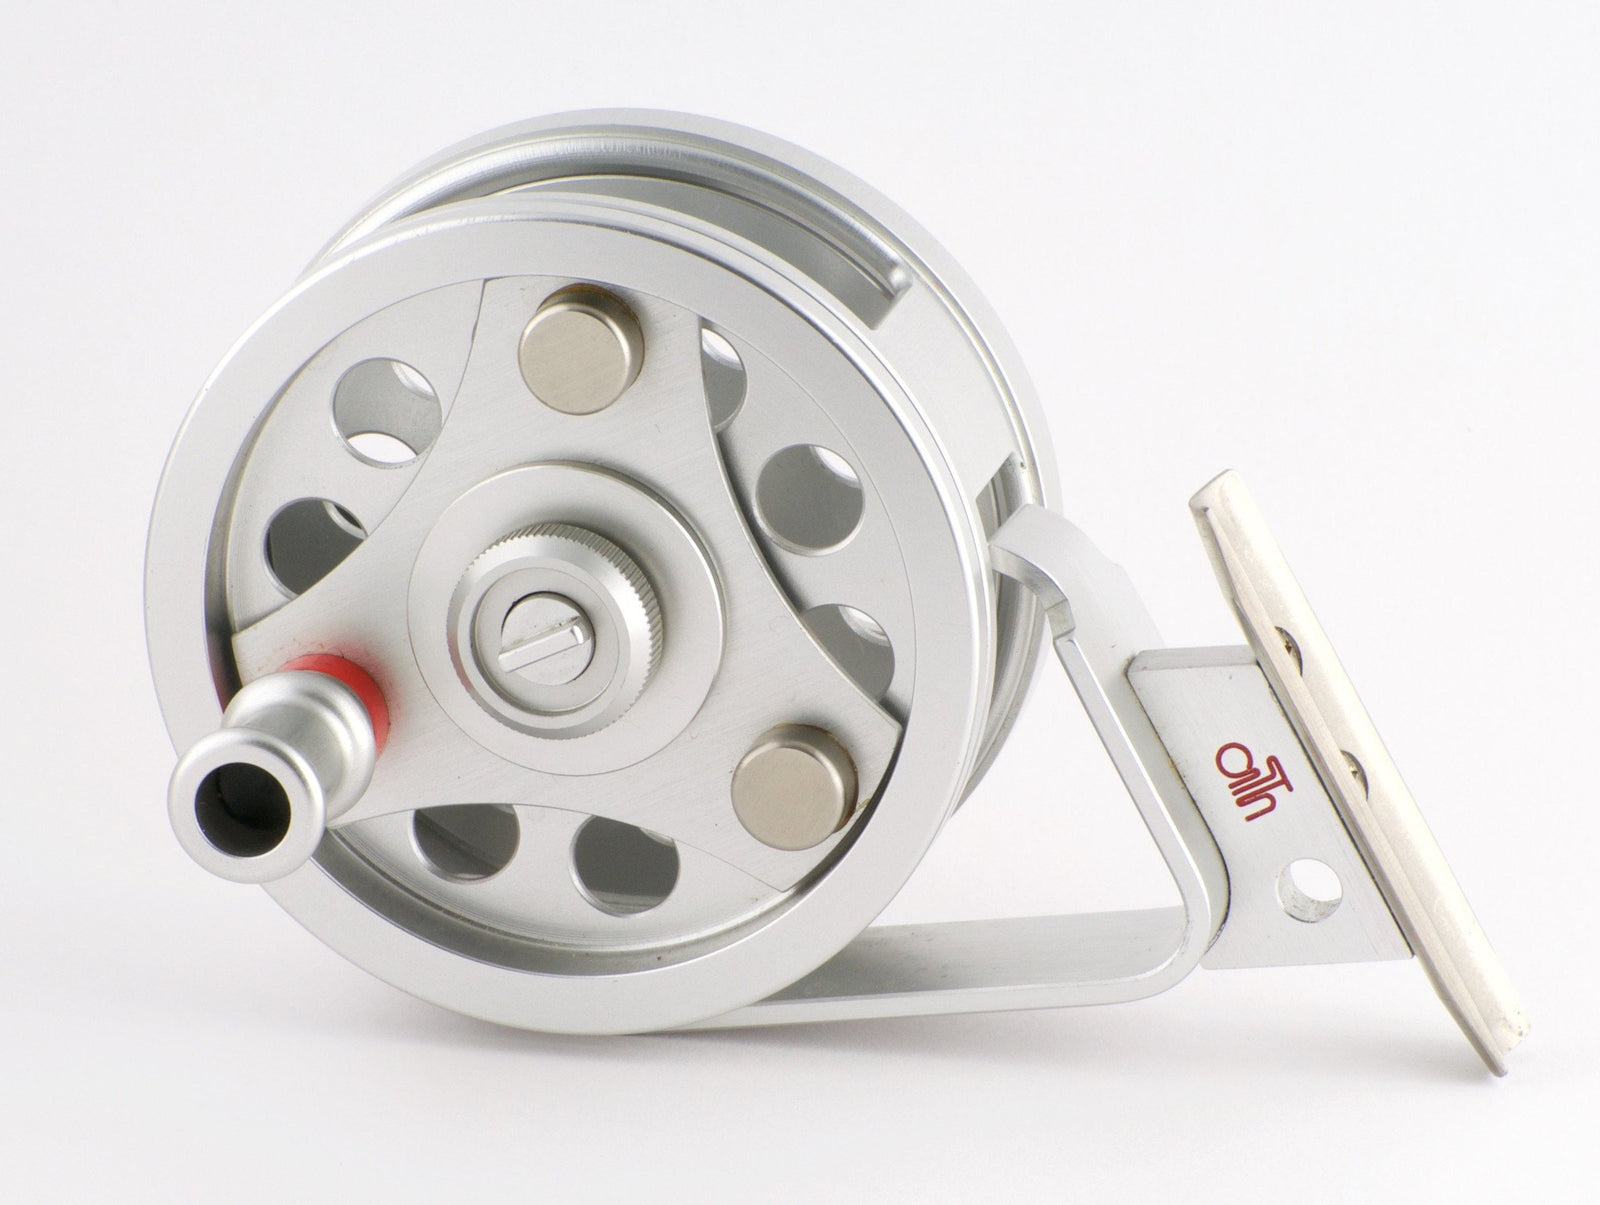 ARI T HART GALLATIN I (SILVER) TROUT FLY REEL – Vintage Fishing Tackle